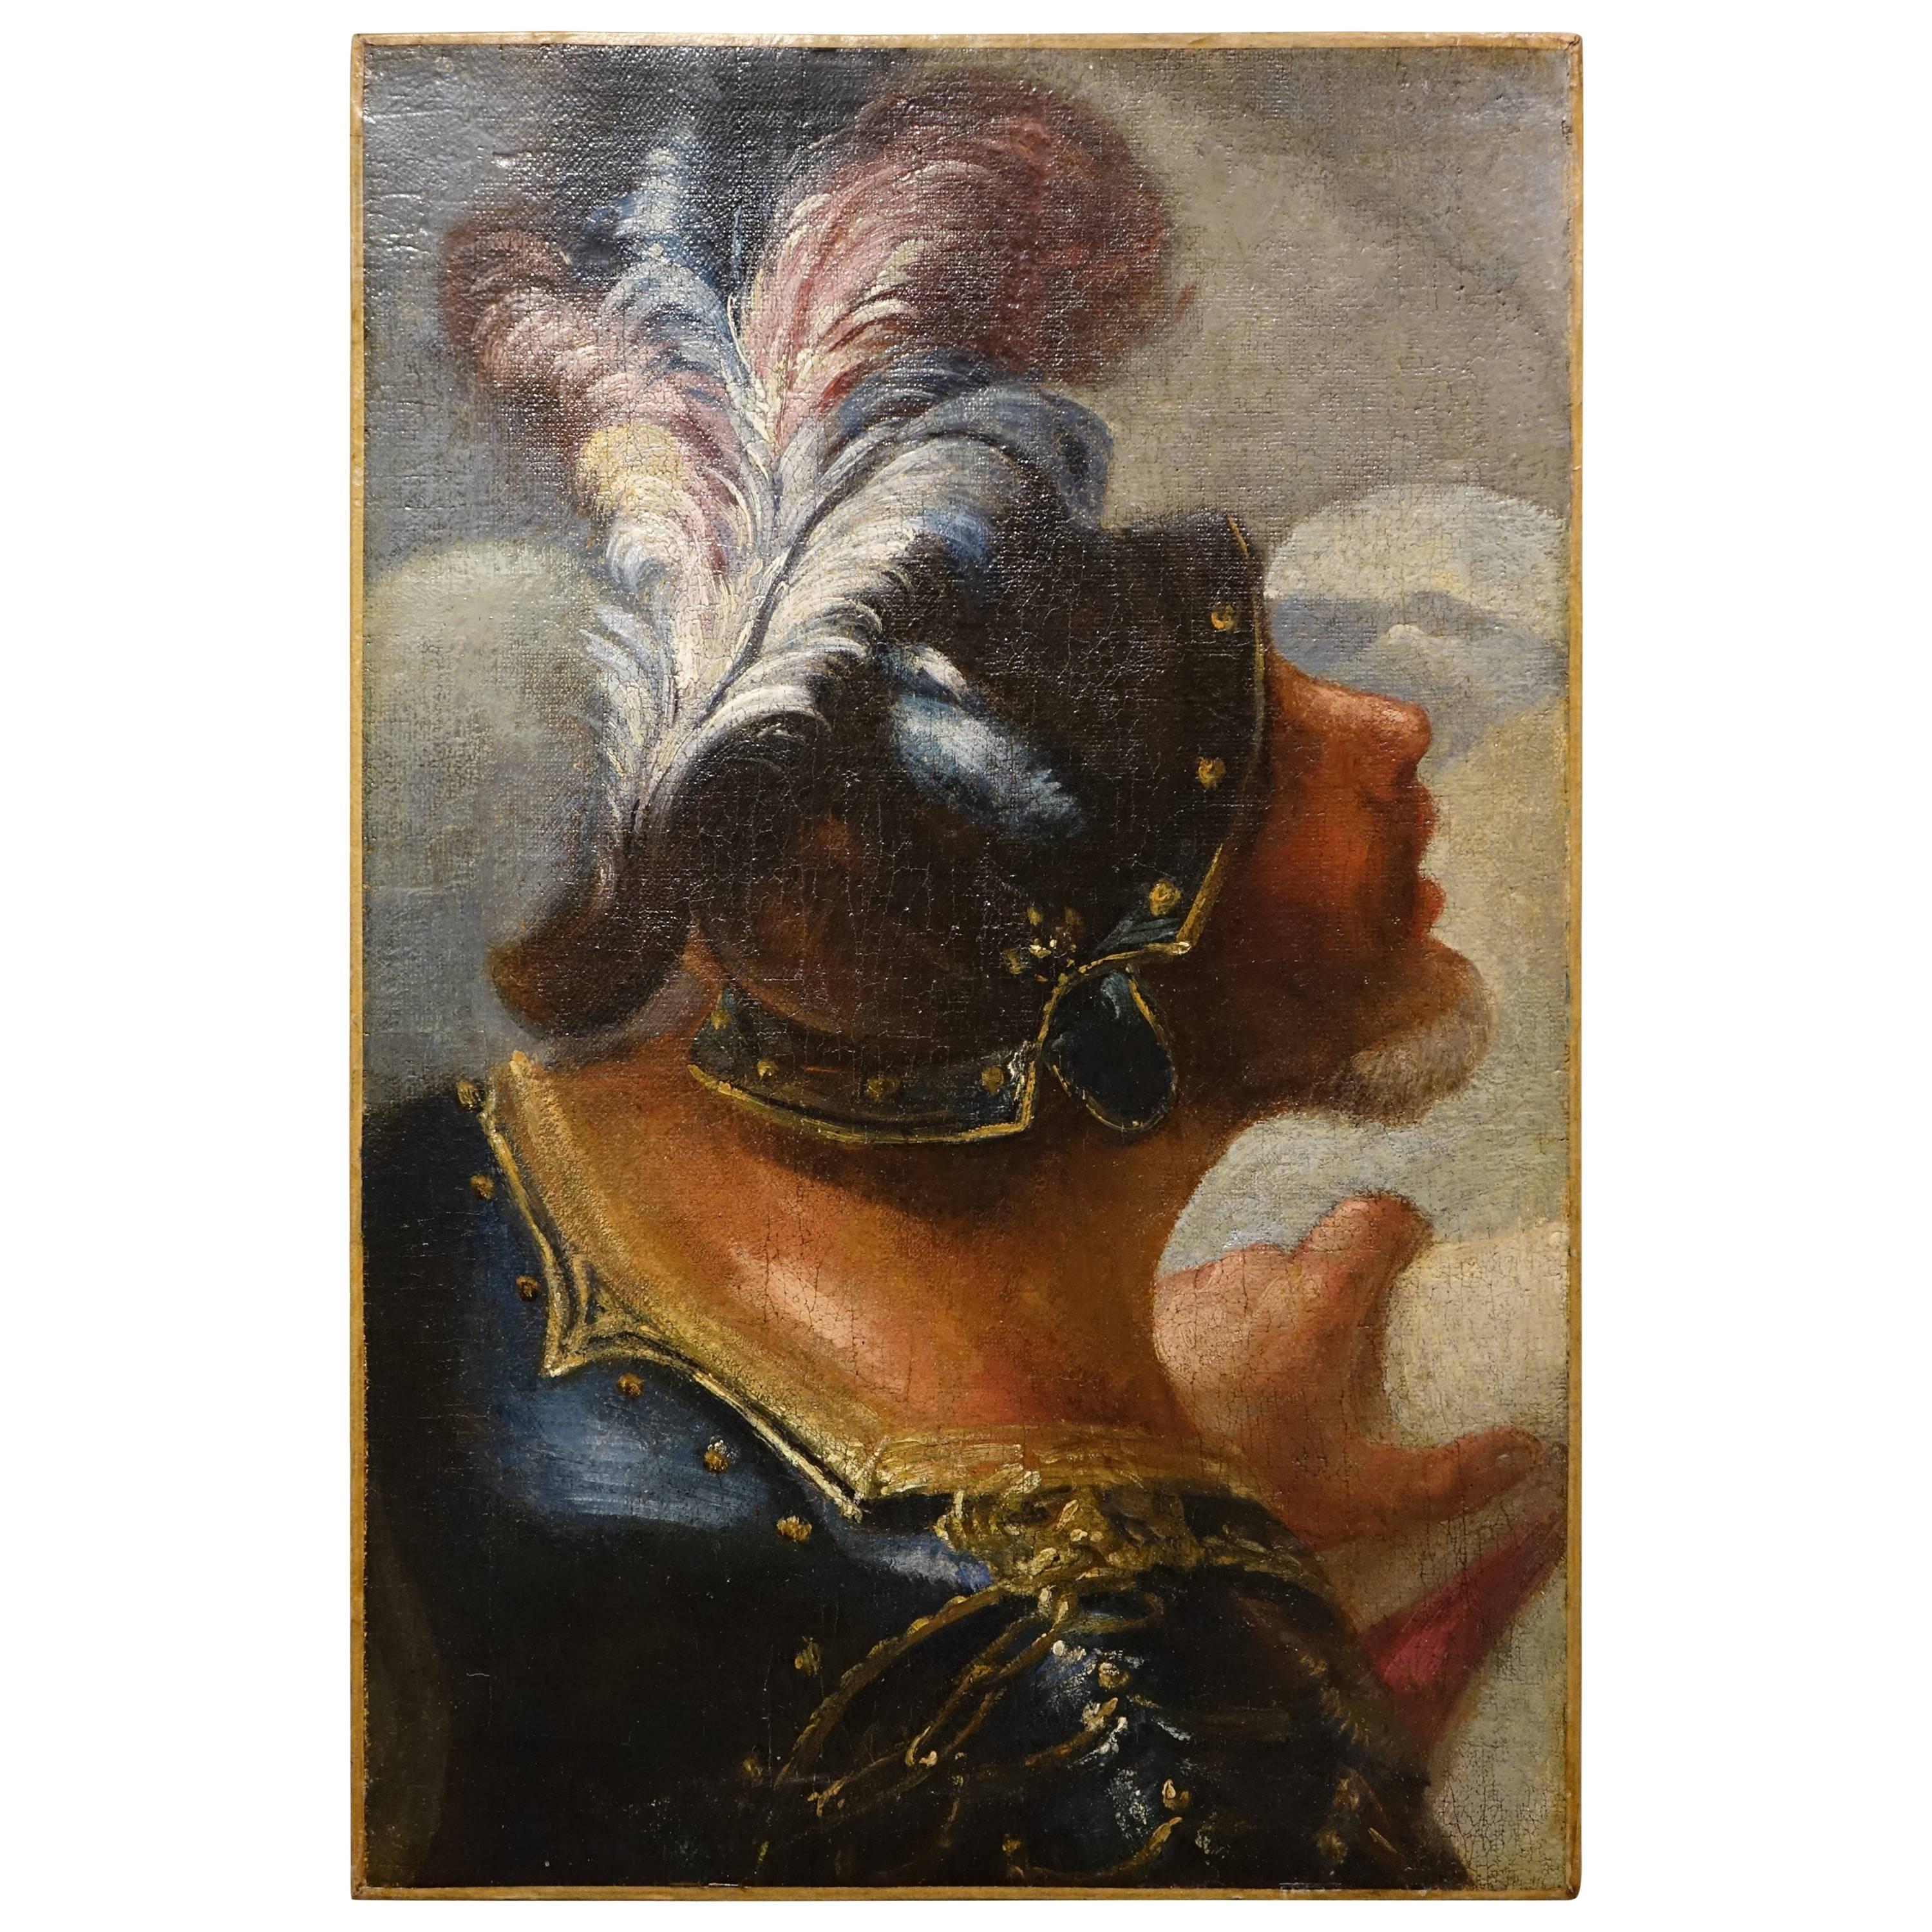 Profile of man in armor, wearing a helmet with pink and blue feathers (Roman soldier) holding a banister, Italy, 17th century. Element of a painting.
Attributed to Andrea Sacchi.